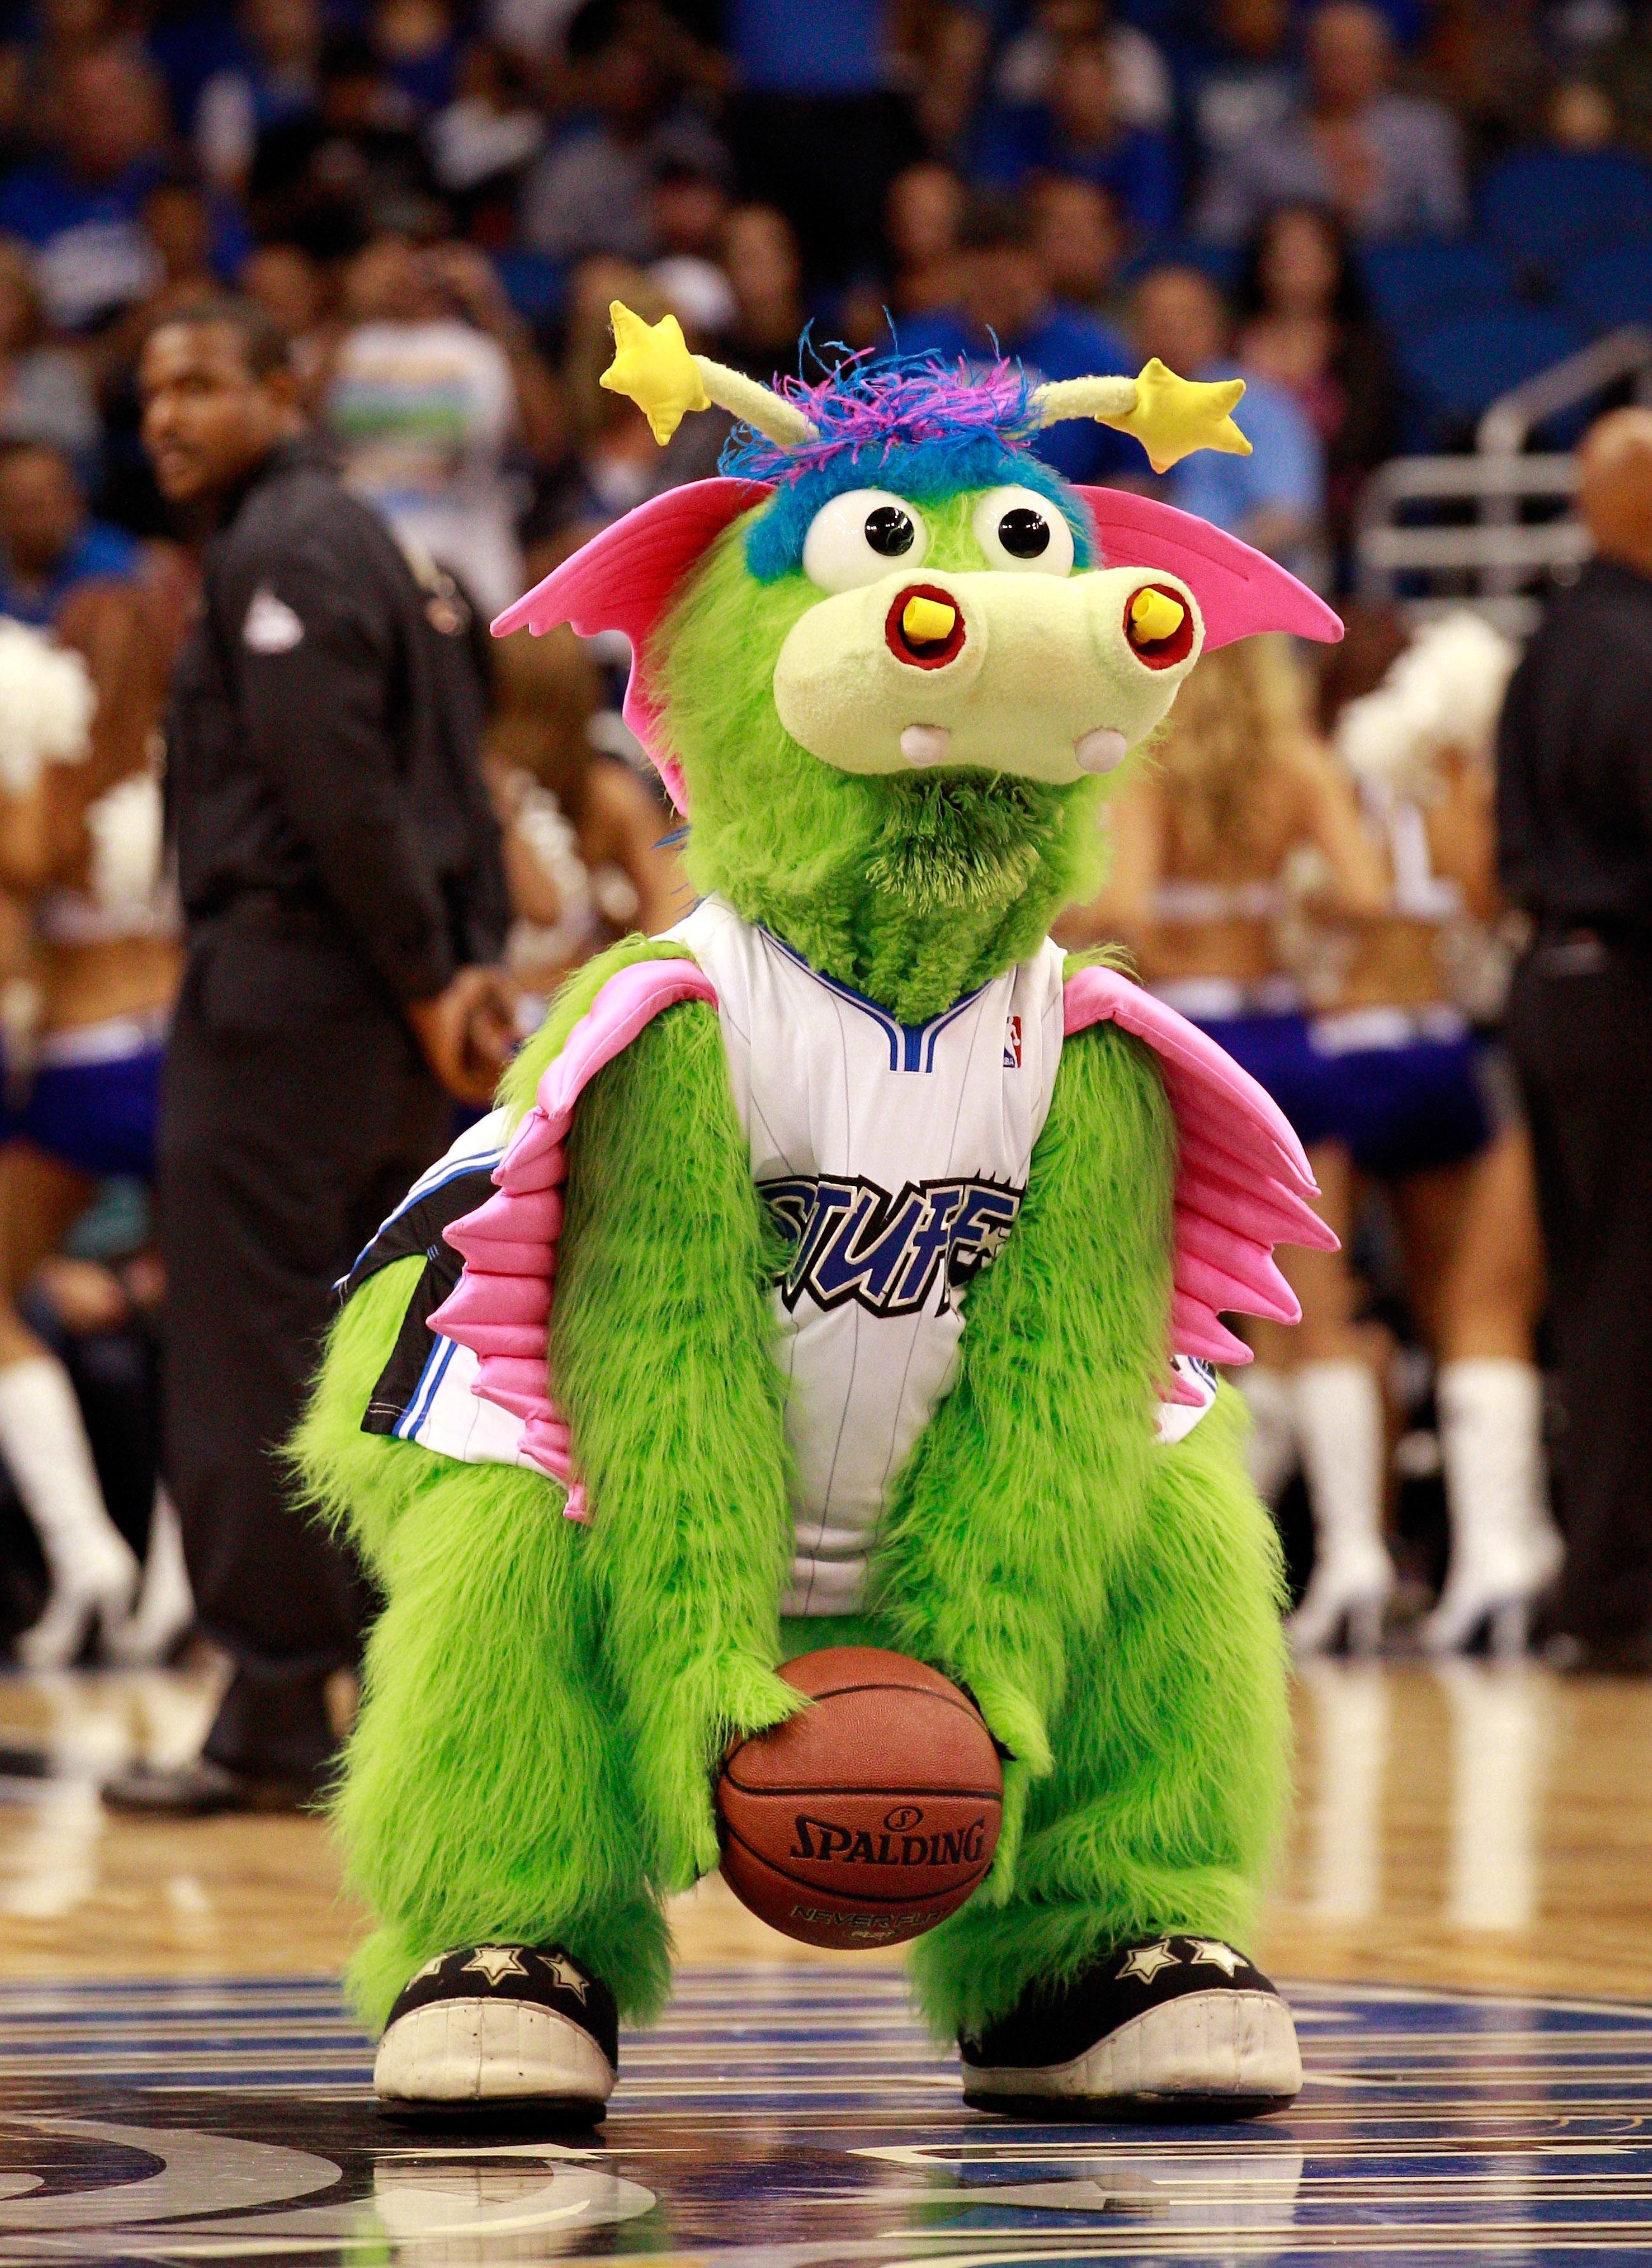 ORLANDO, FL - OCTOBER 10:  The Orlando Magic mascot 'Stuff' attempts a shot during the game against the New Orleans Hornets at Amway Arena on October 10, 2010 in Orlando, Florida. NOTE TO USER: User expressly acknowledges and agrees that, by downloading a